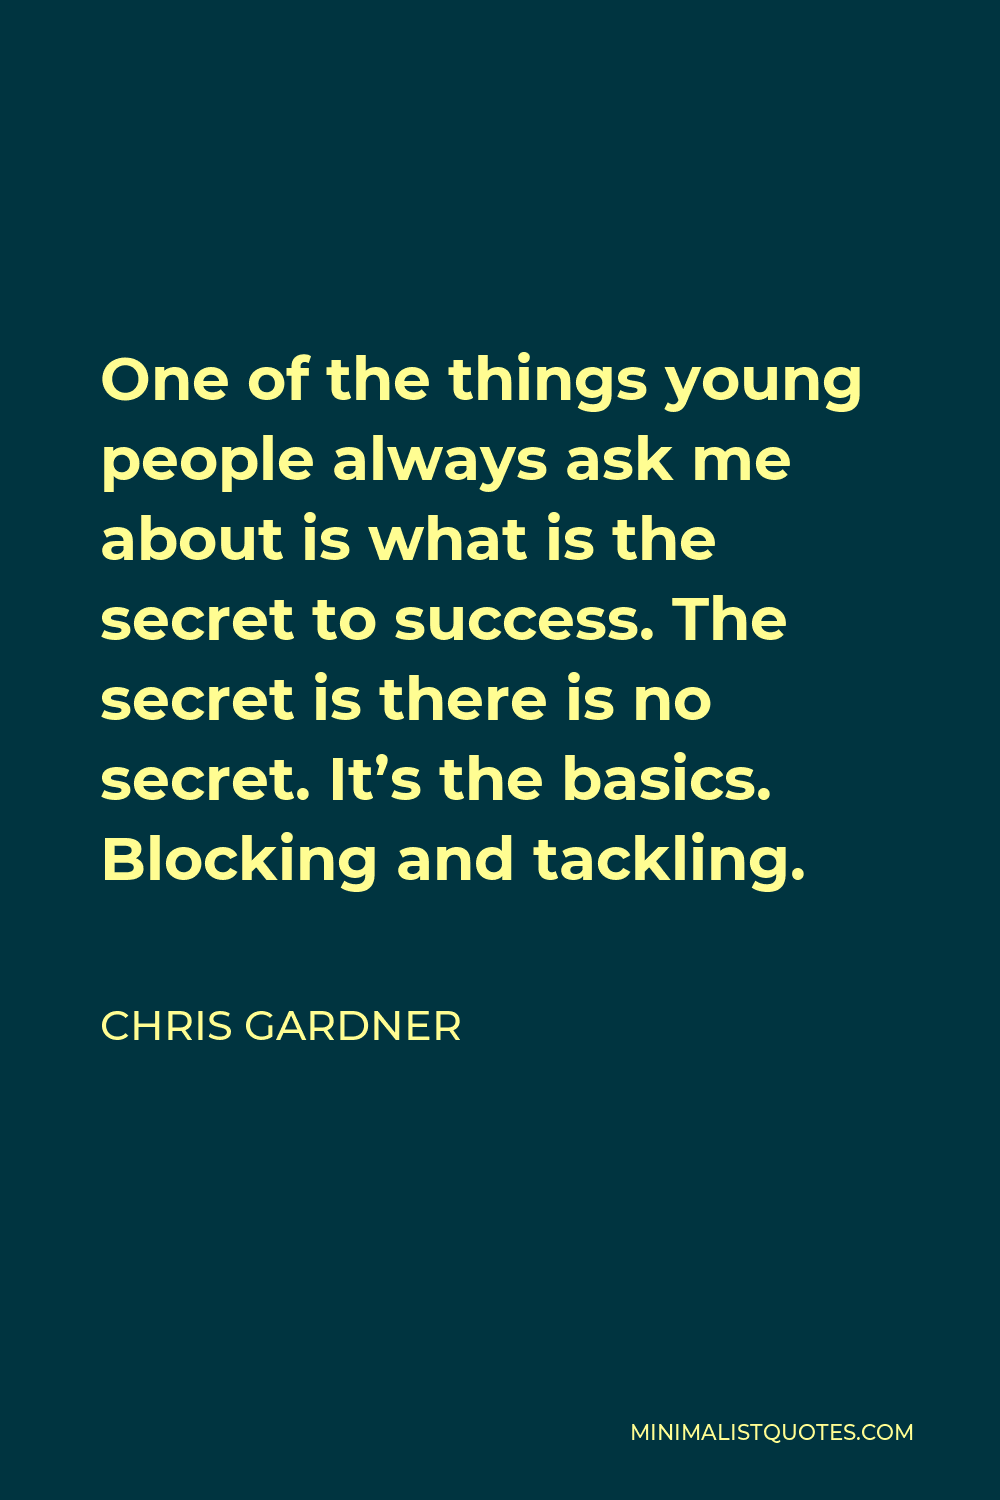 Chris Gardner Quote - One of the things young people always ask me about is what is the secret to success. The secret is there is no secret. It’s the basics. Blocking and tackling.